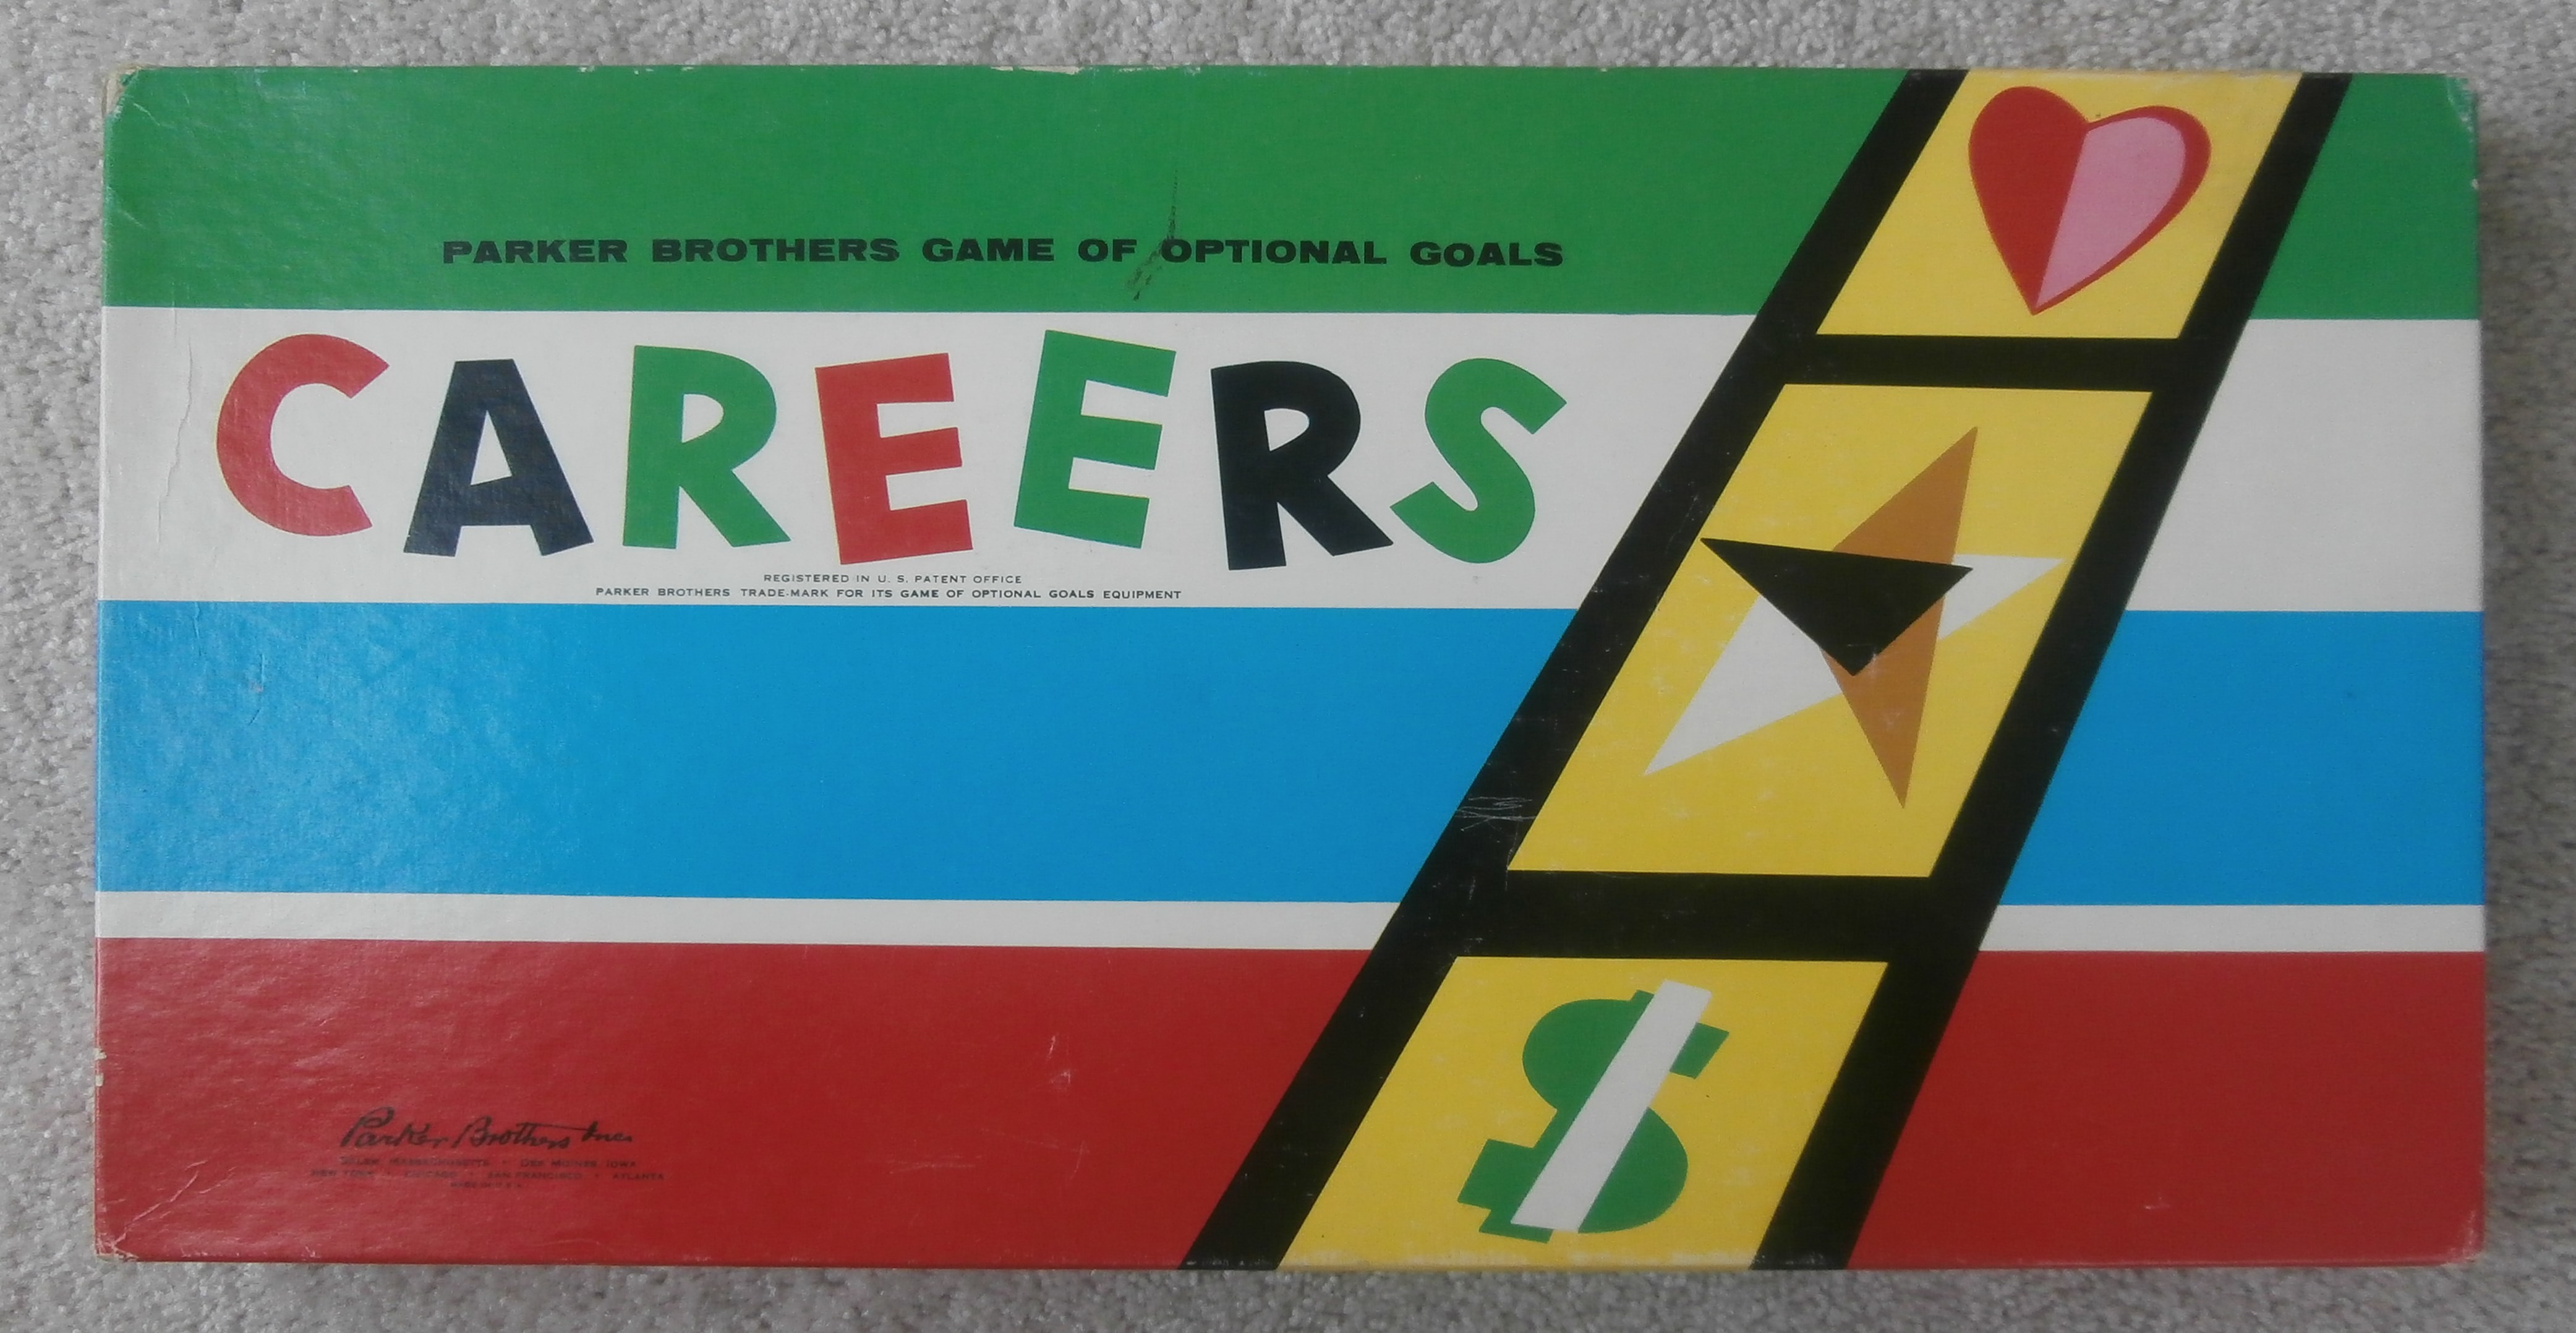 Opportunity Knocks in the Board Game of Careers